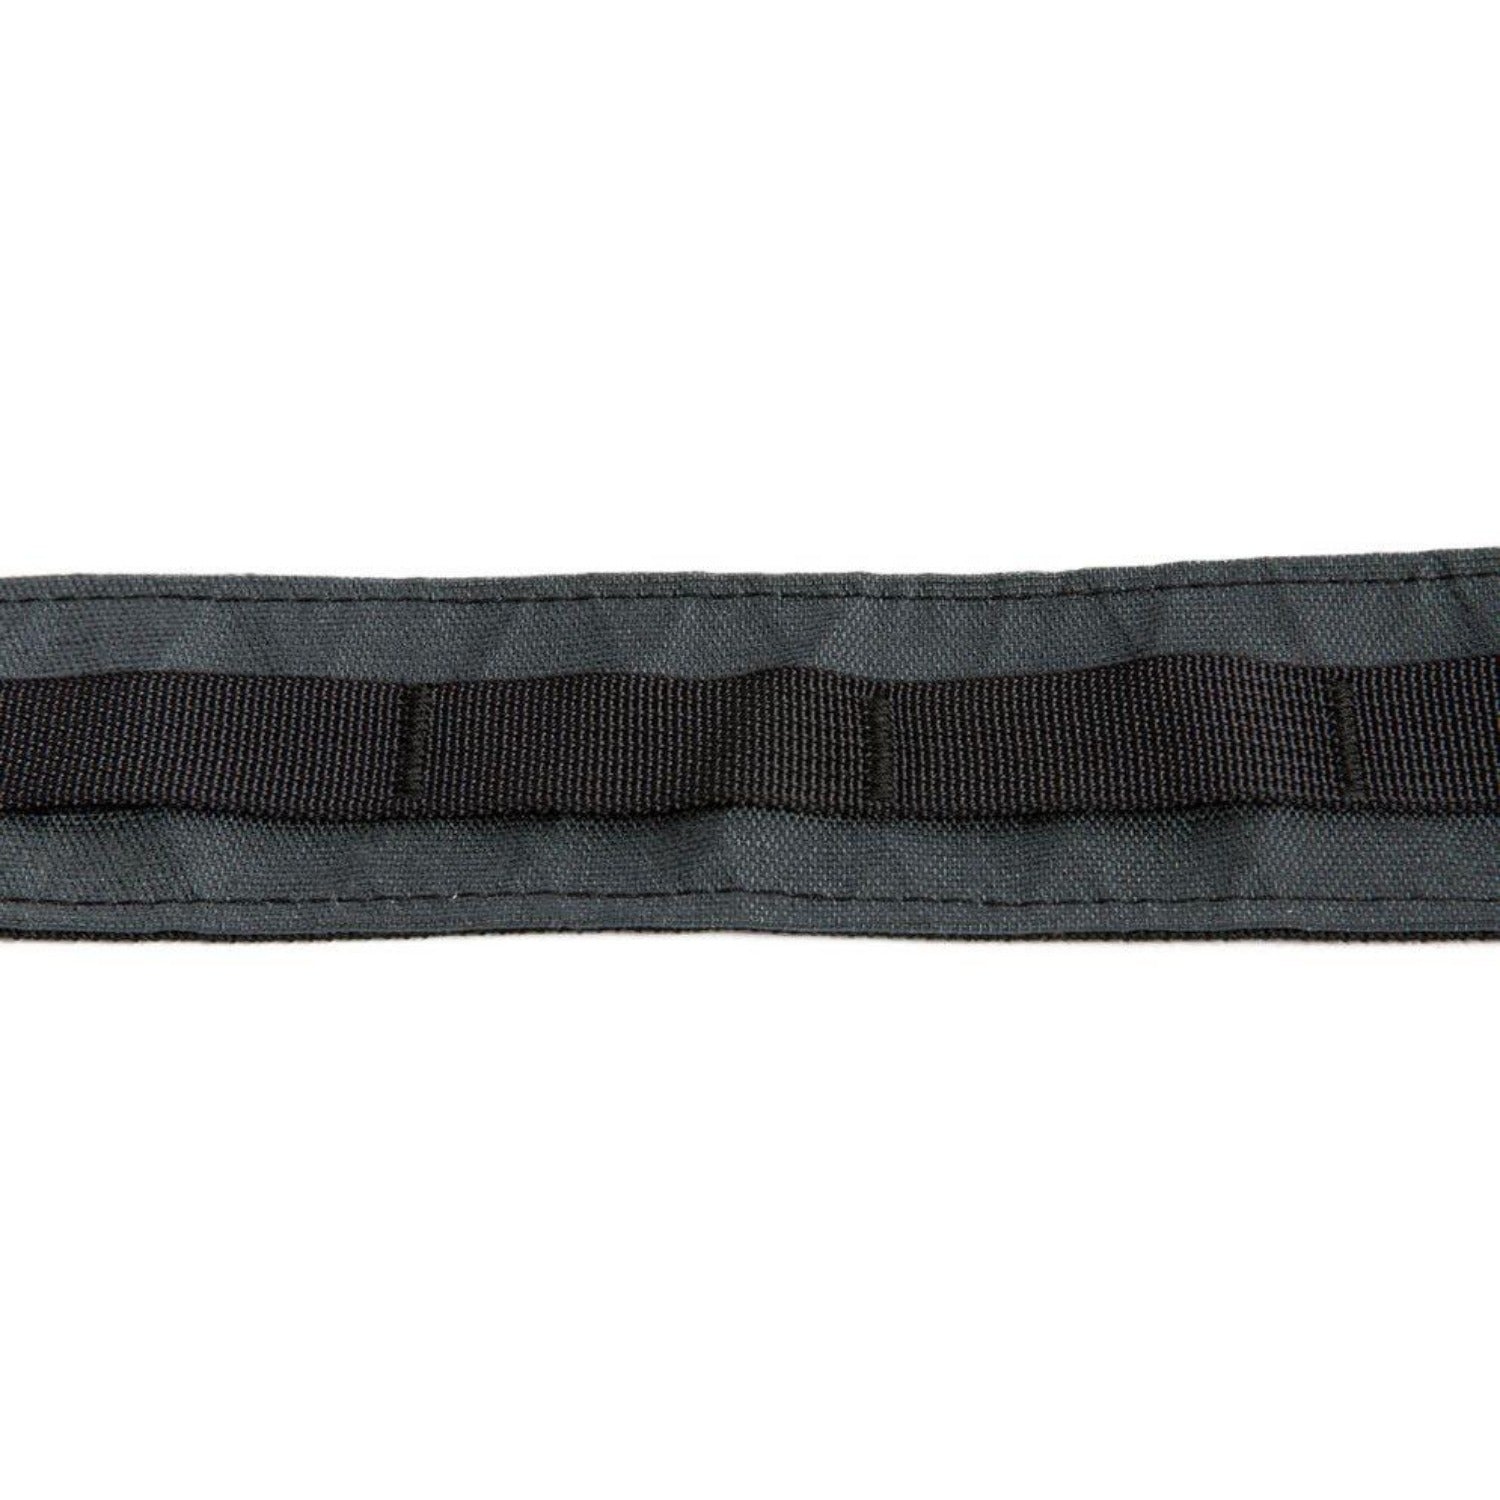 OUTER SHELL ADVENTURE Camera Strap